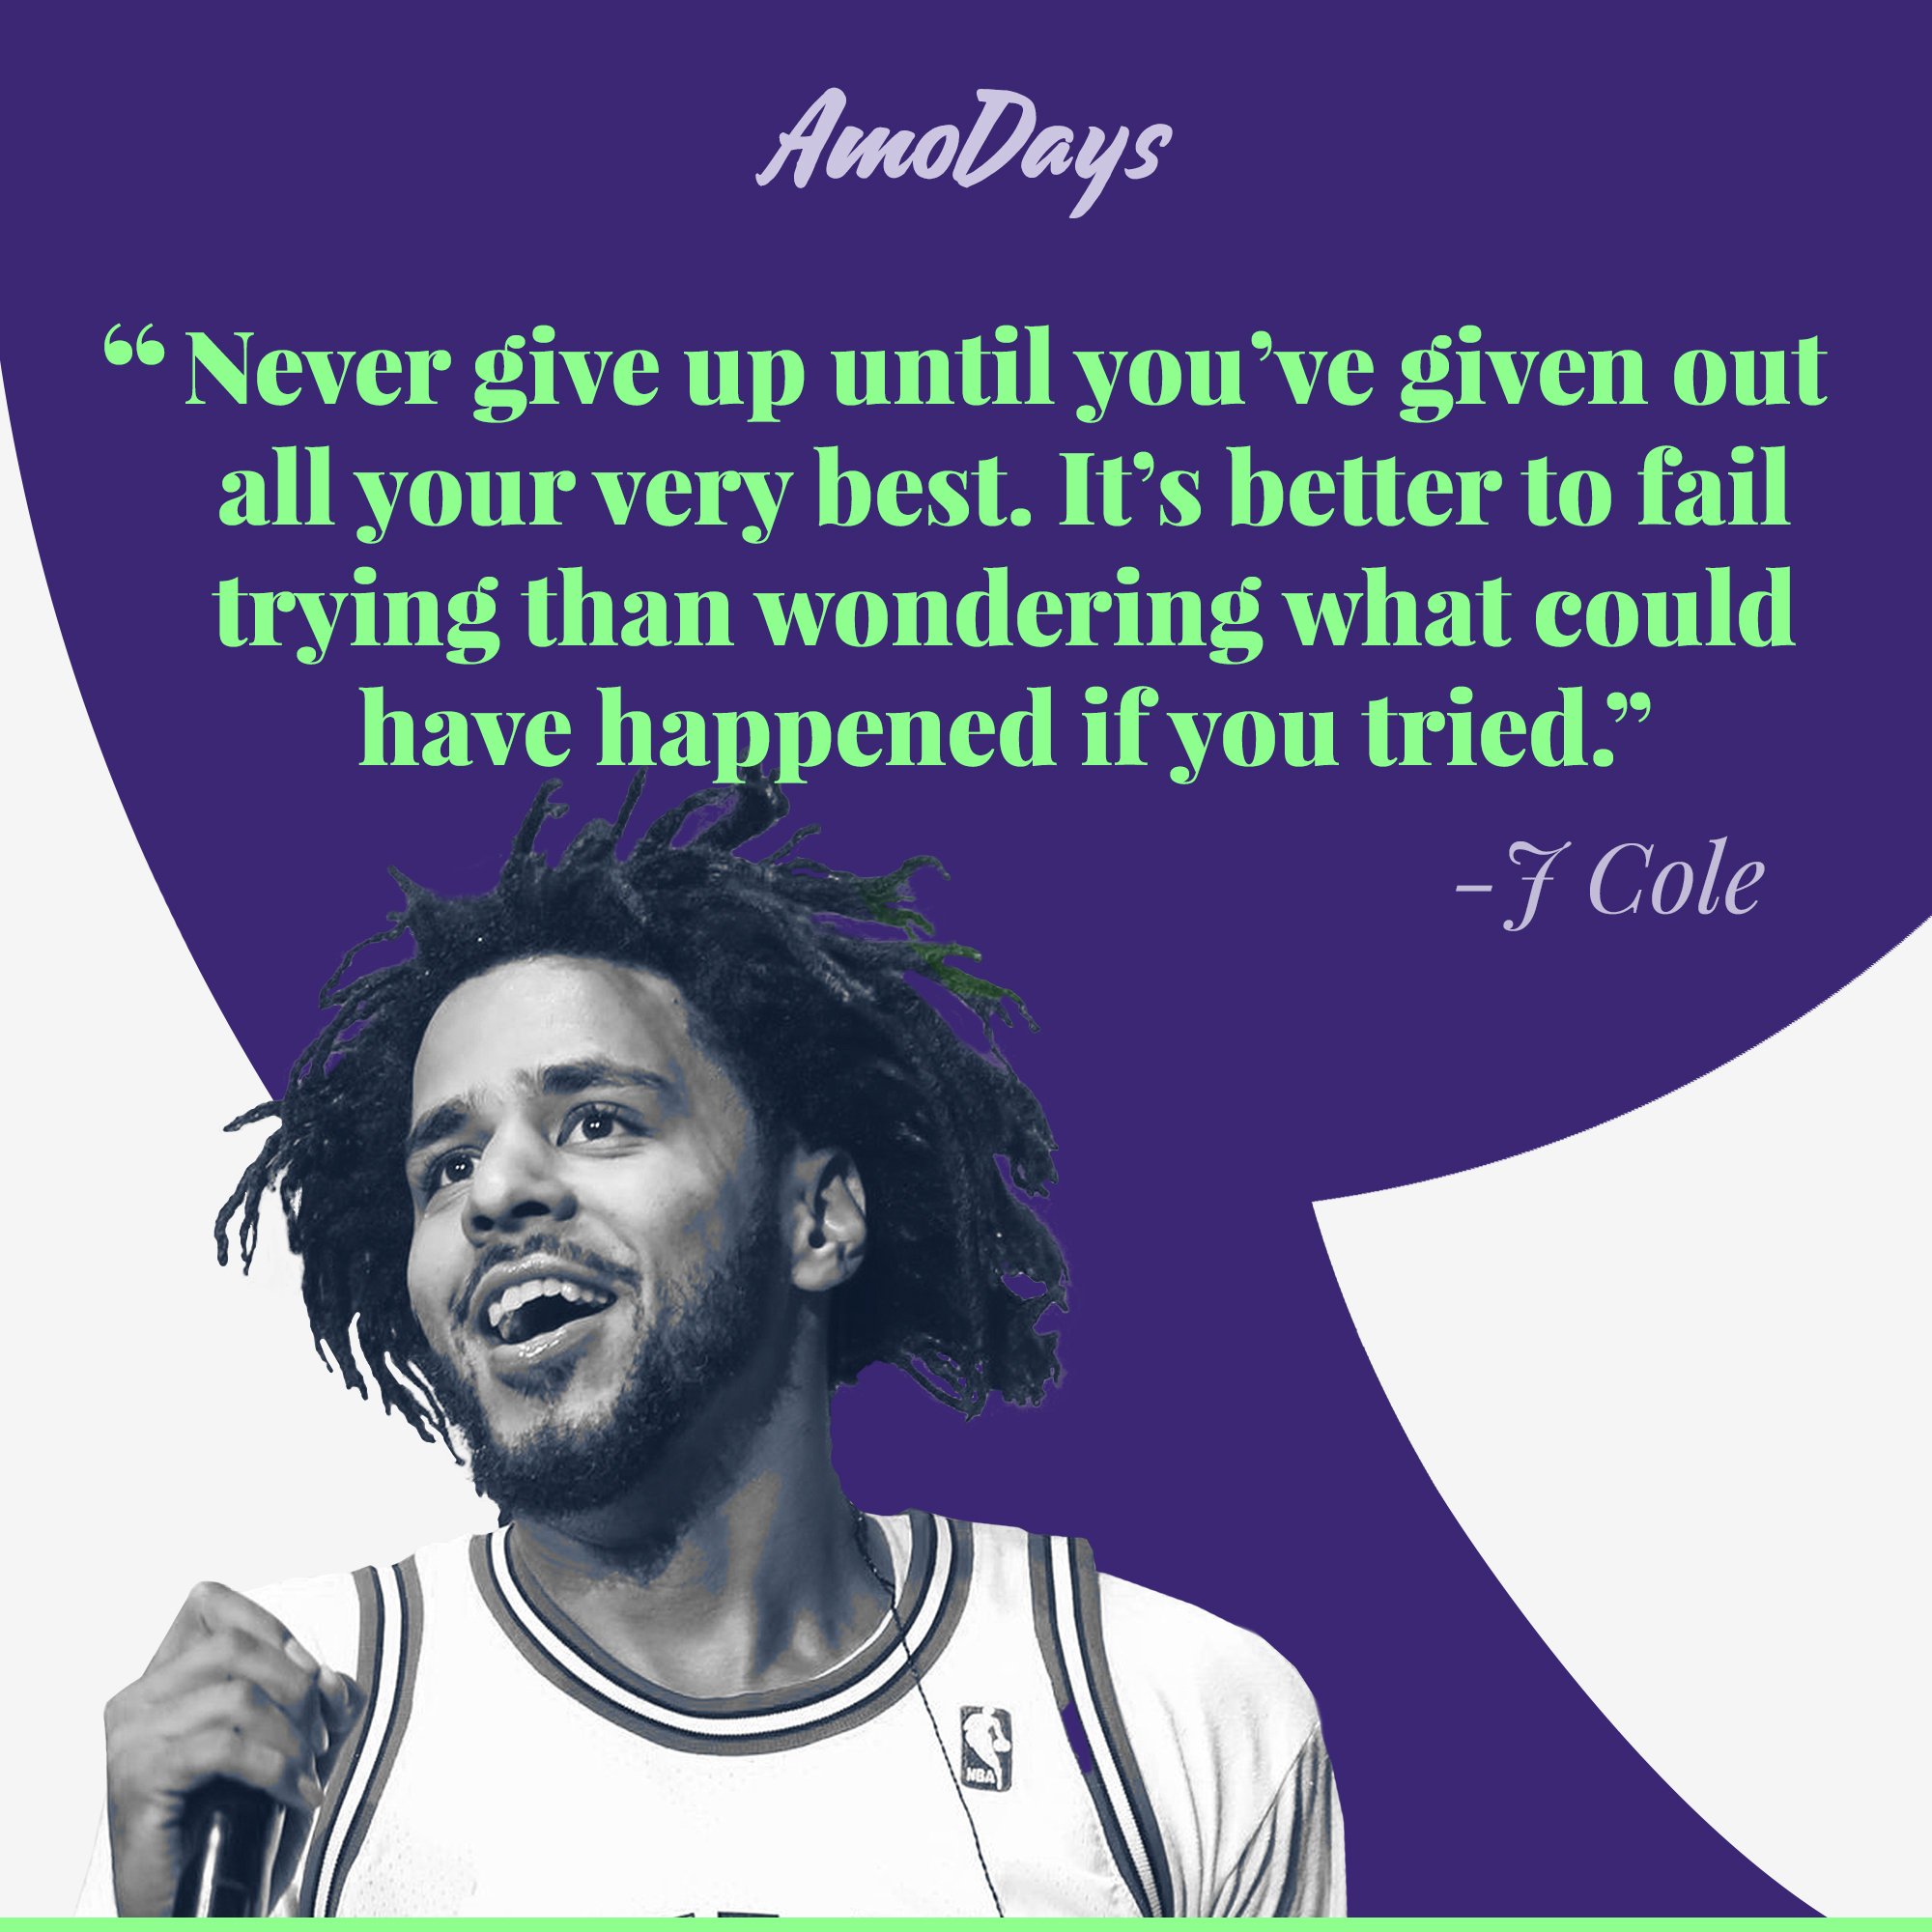 J Cole's quote: “Never give up until you’ve given out all your very best. It’s better to fail trying than wondering what could have happened if you tried.” | Image: AmoDays